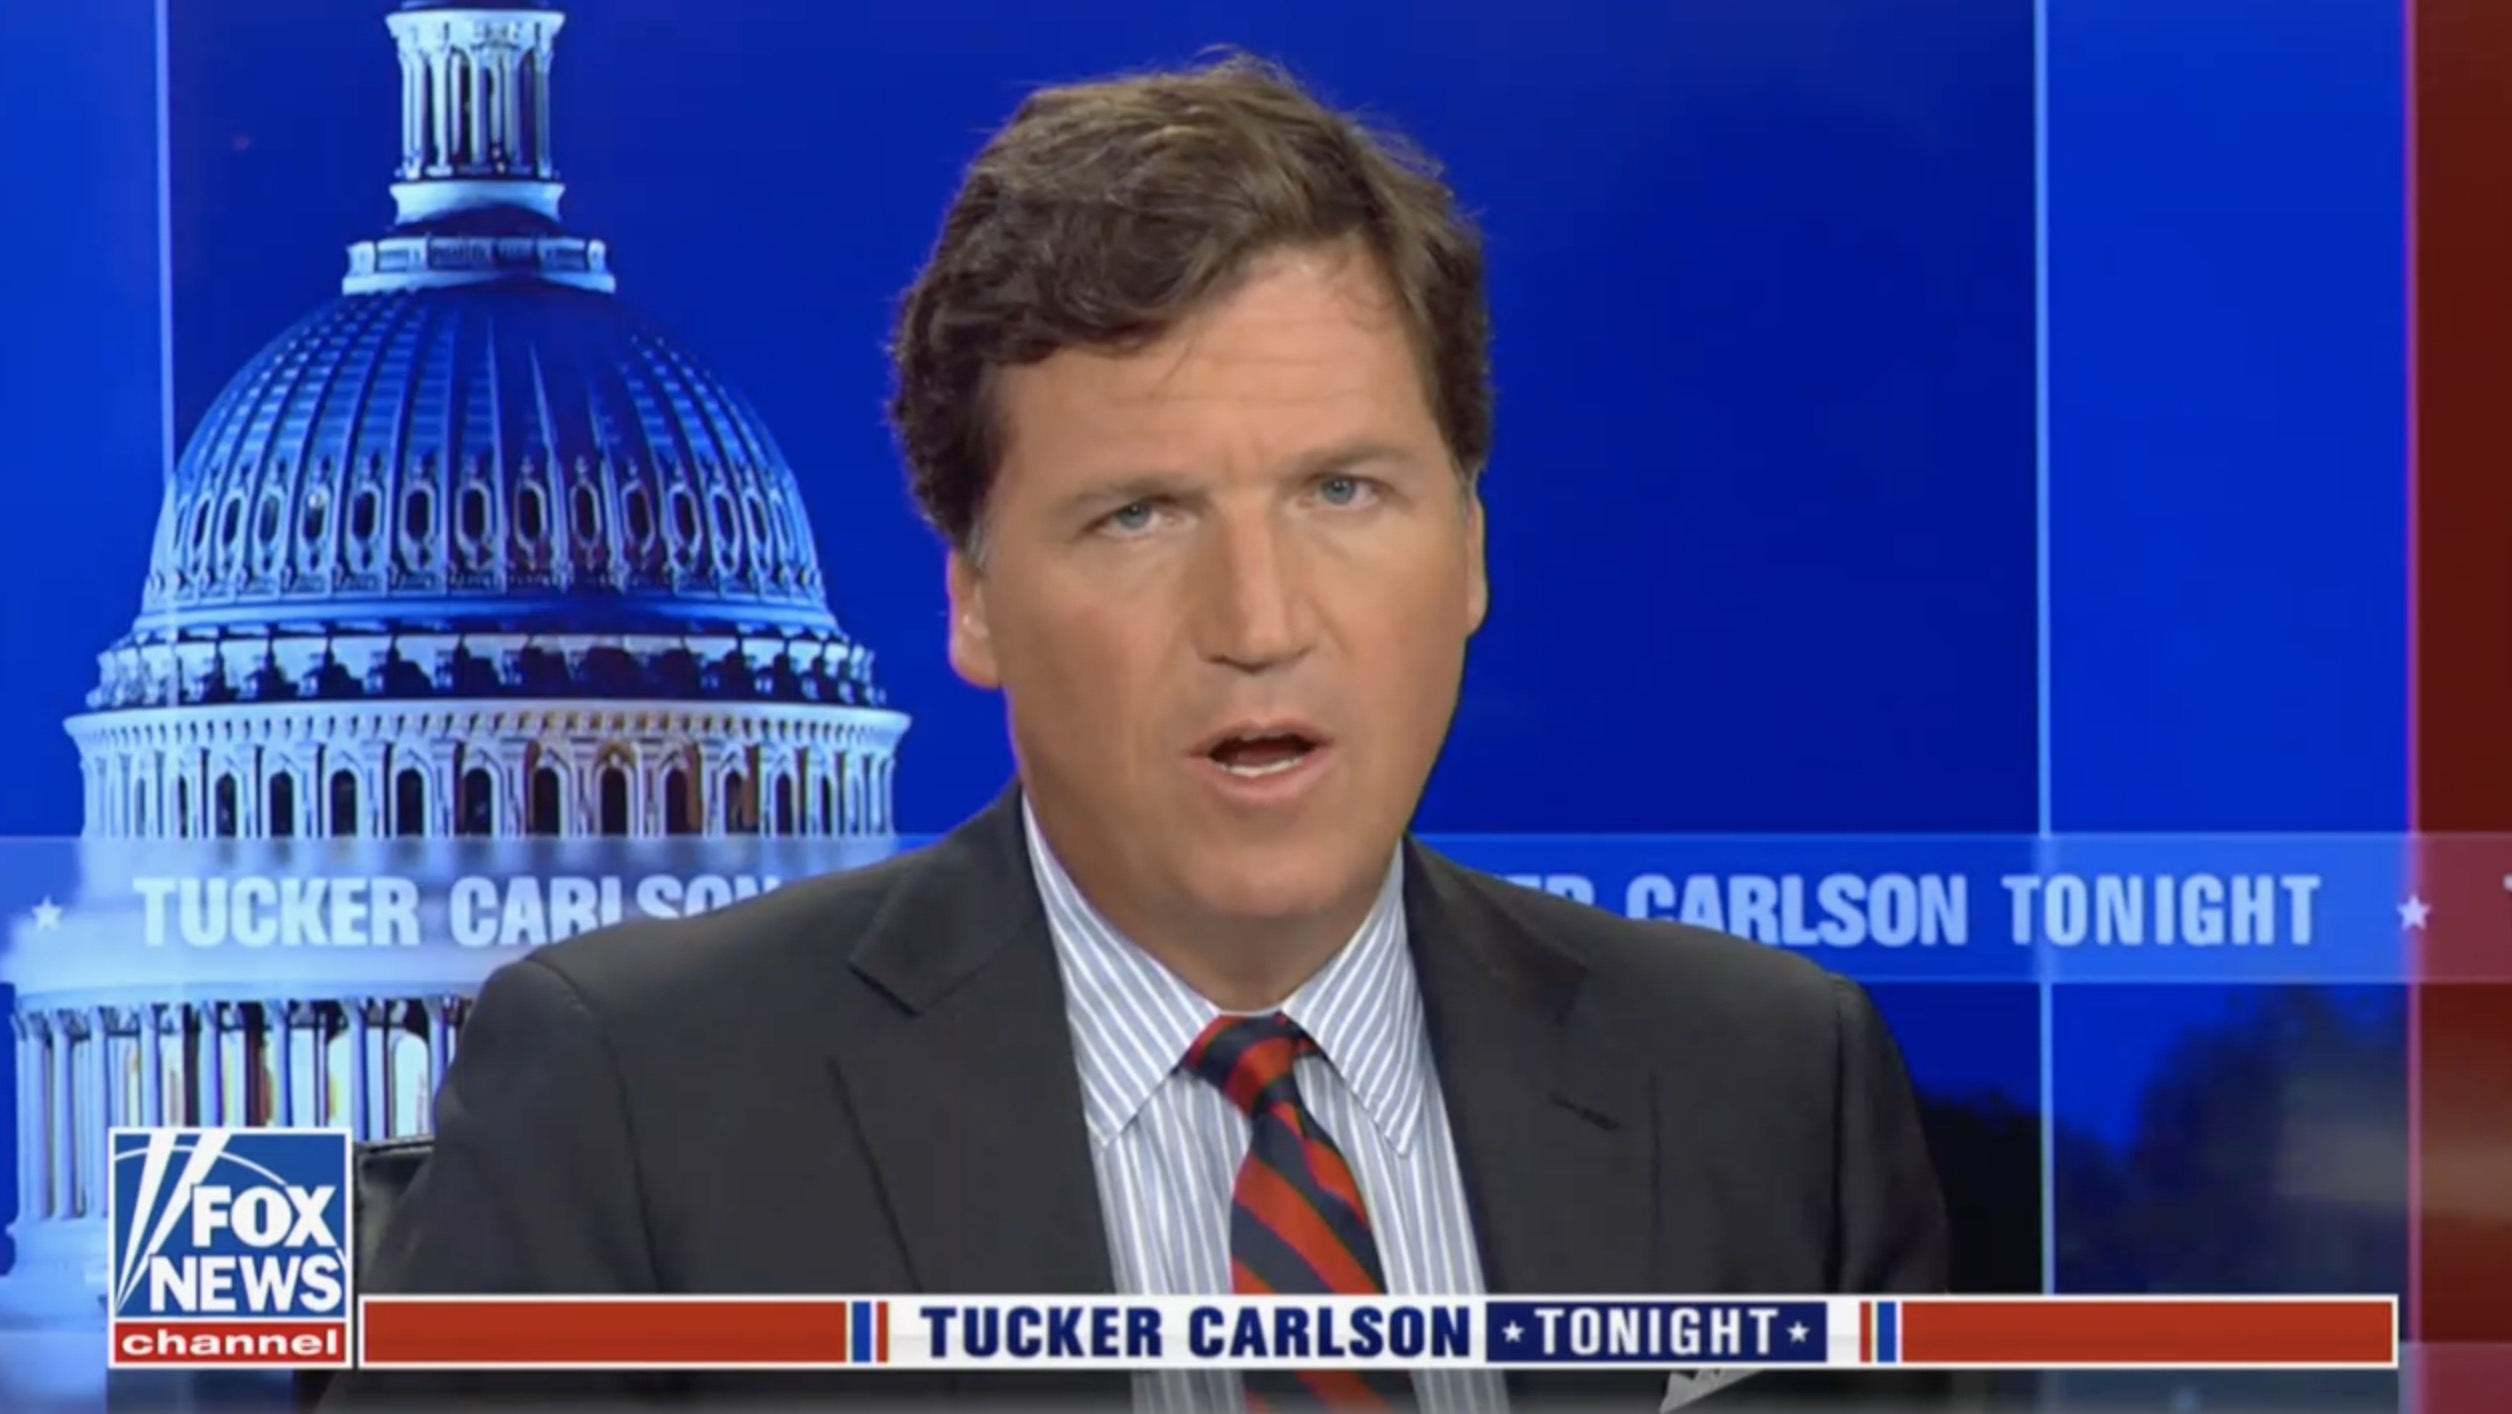 Fox News Reportedly Has Secret ‘Oppo File’ on Tucker Carlson in Case He Trashes the Network 